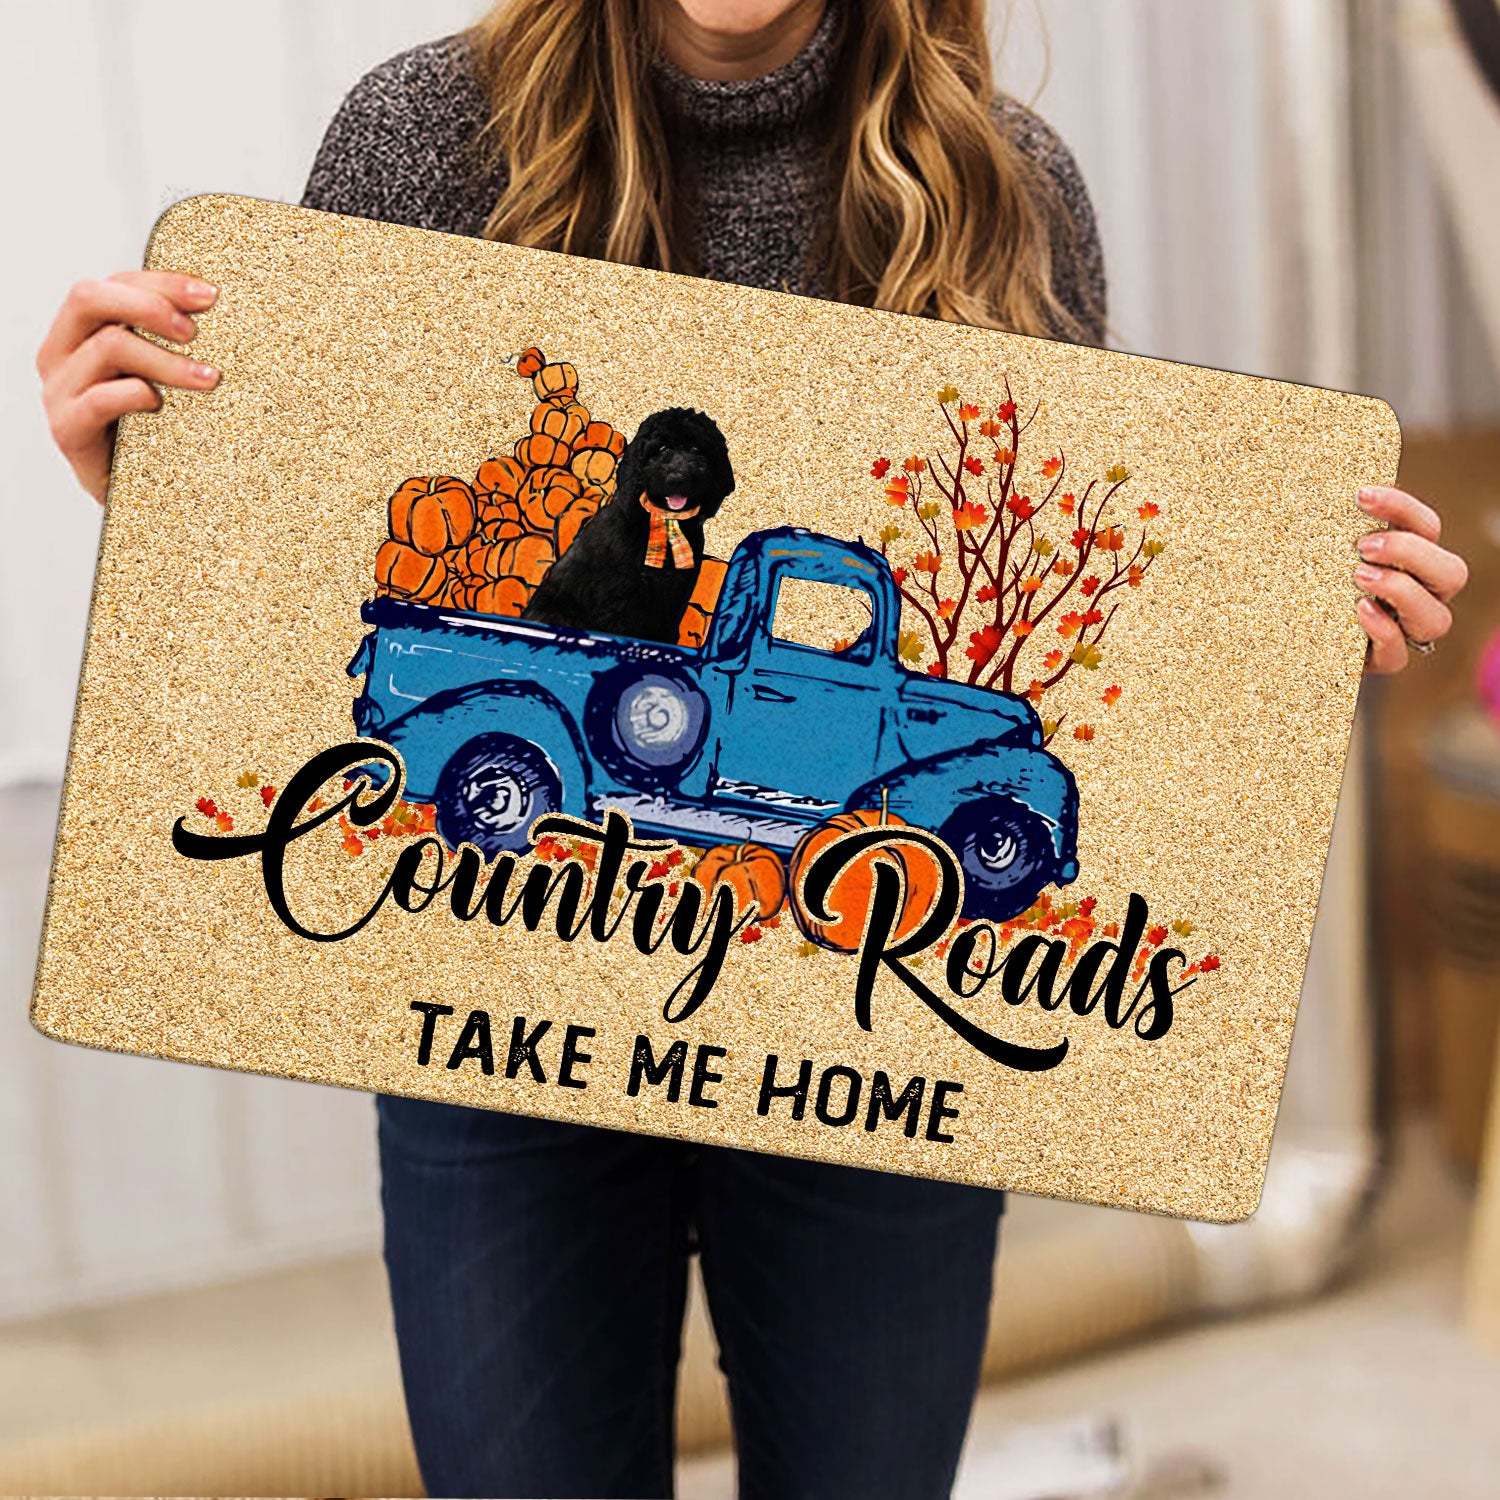 Country Toads Take Me Home Welcome Mat